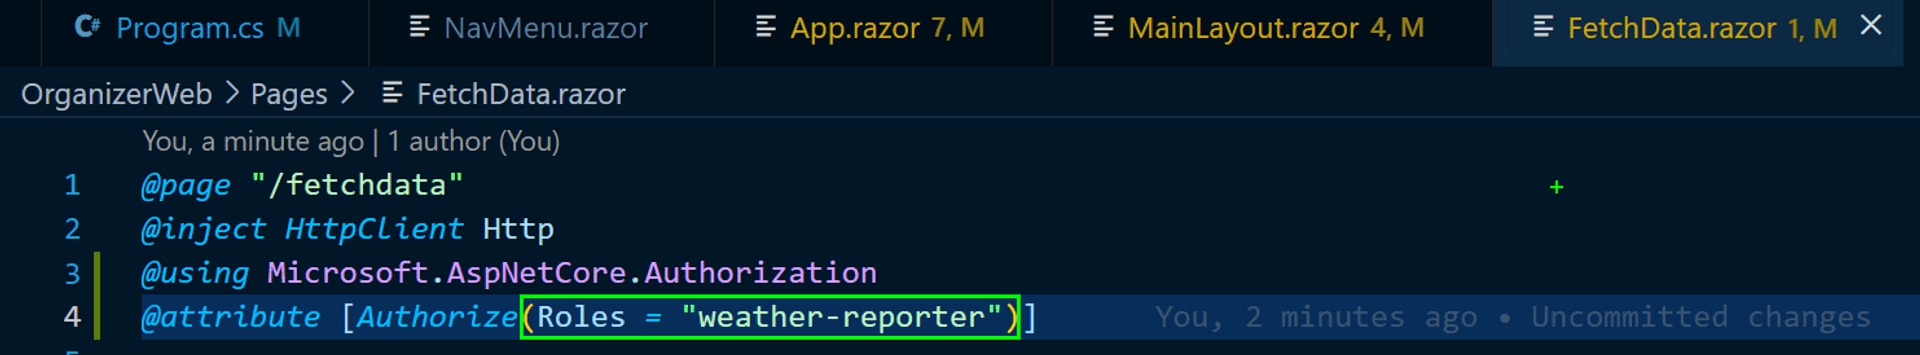 fetch data code with Authorize attribute amended with weather-reporter role